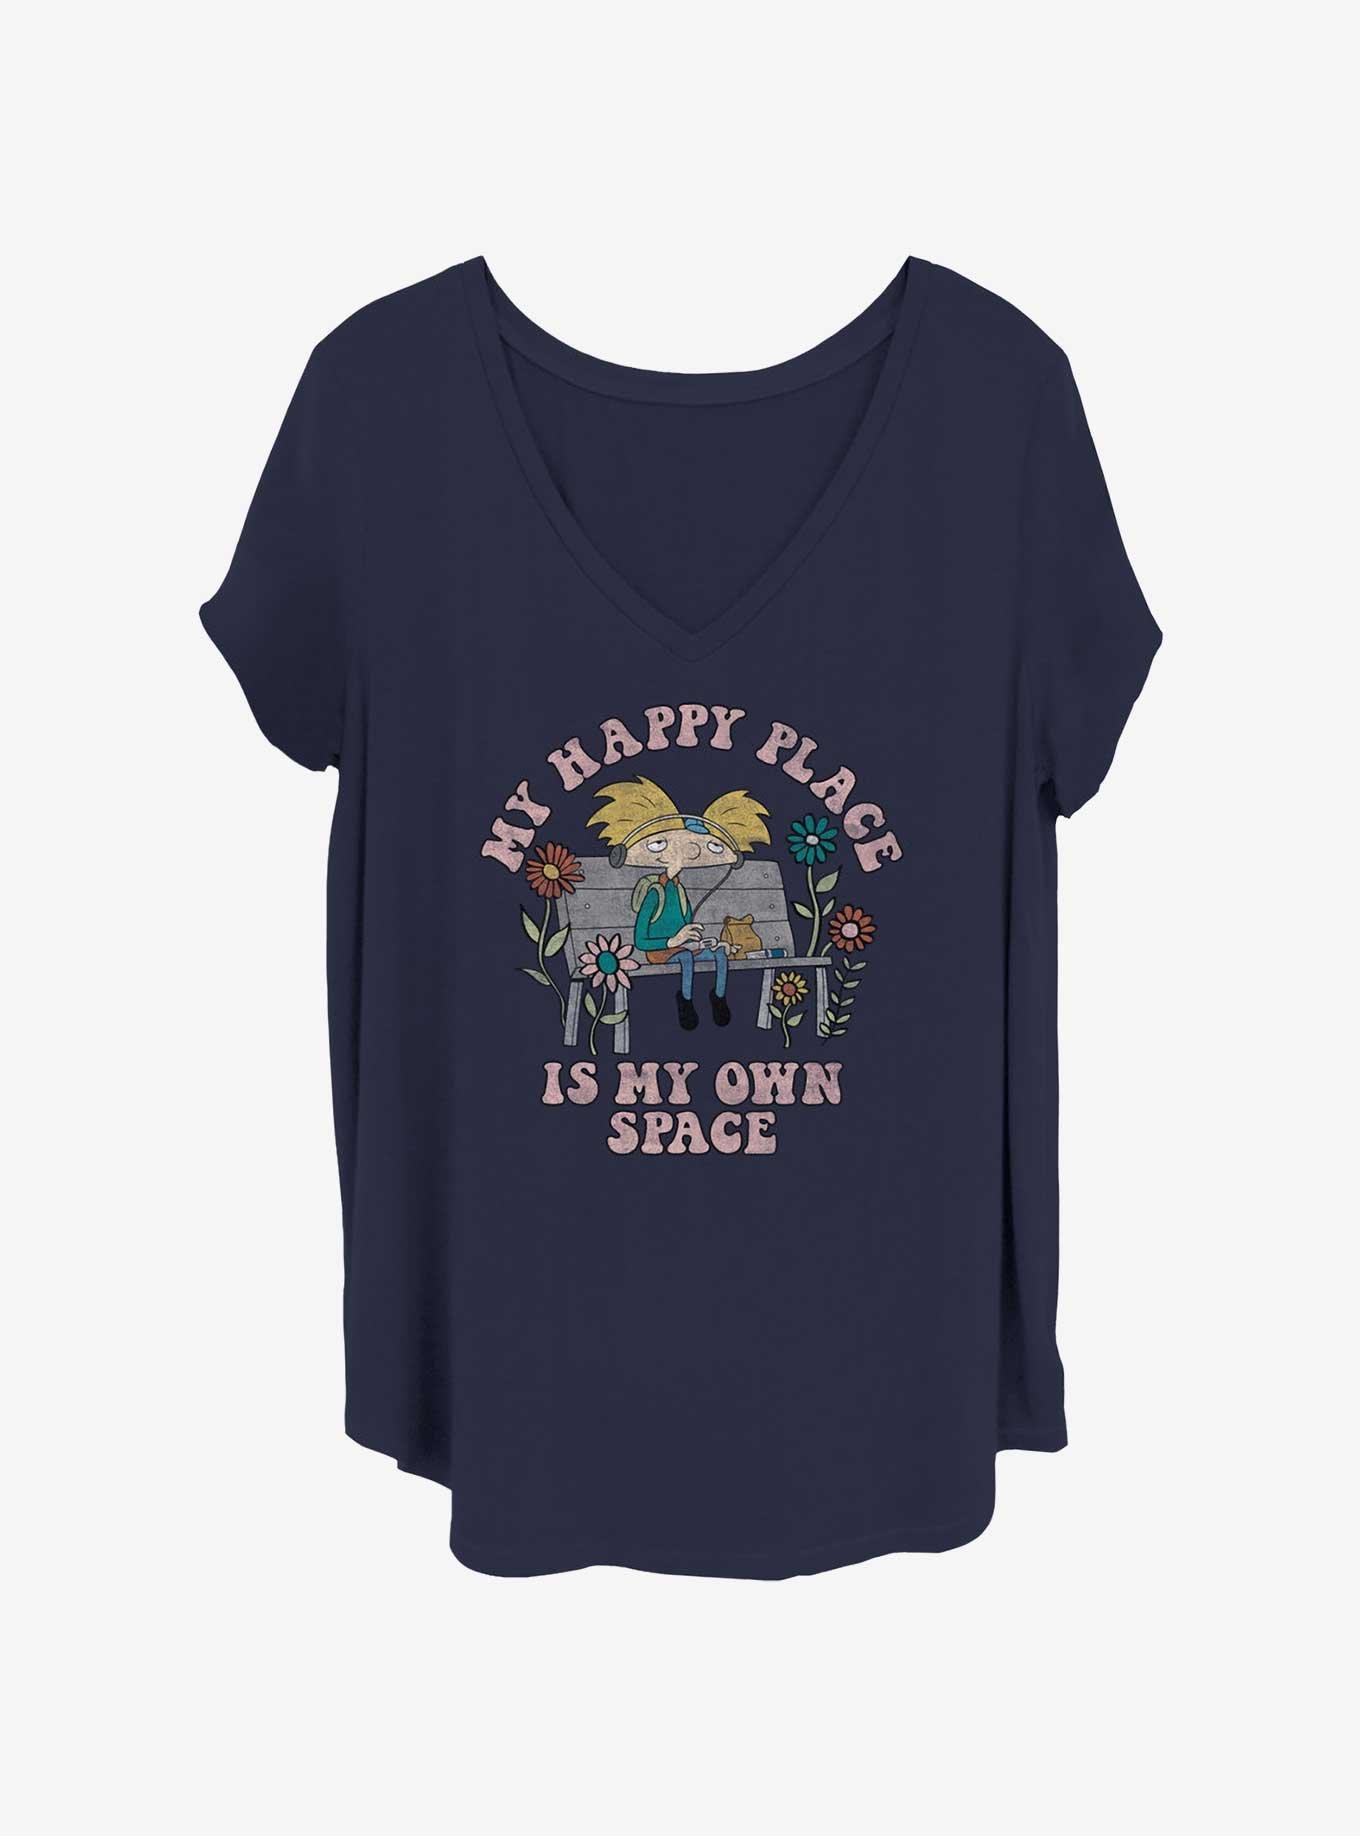 Nickelodeon Hey Arnold My Happy Place Girls T-Shirt Plus Size, NAVY, hi-res